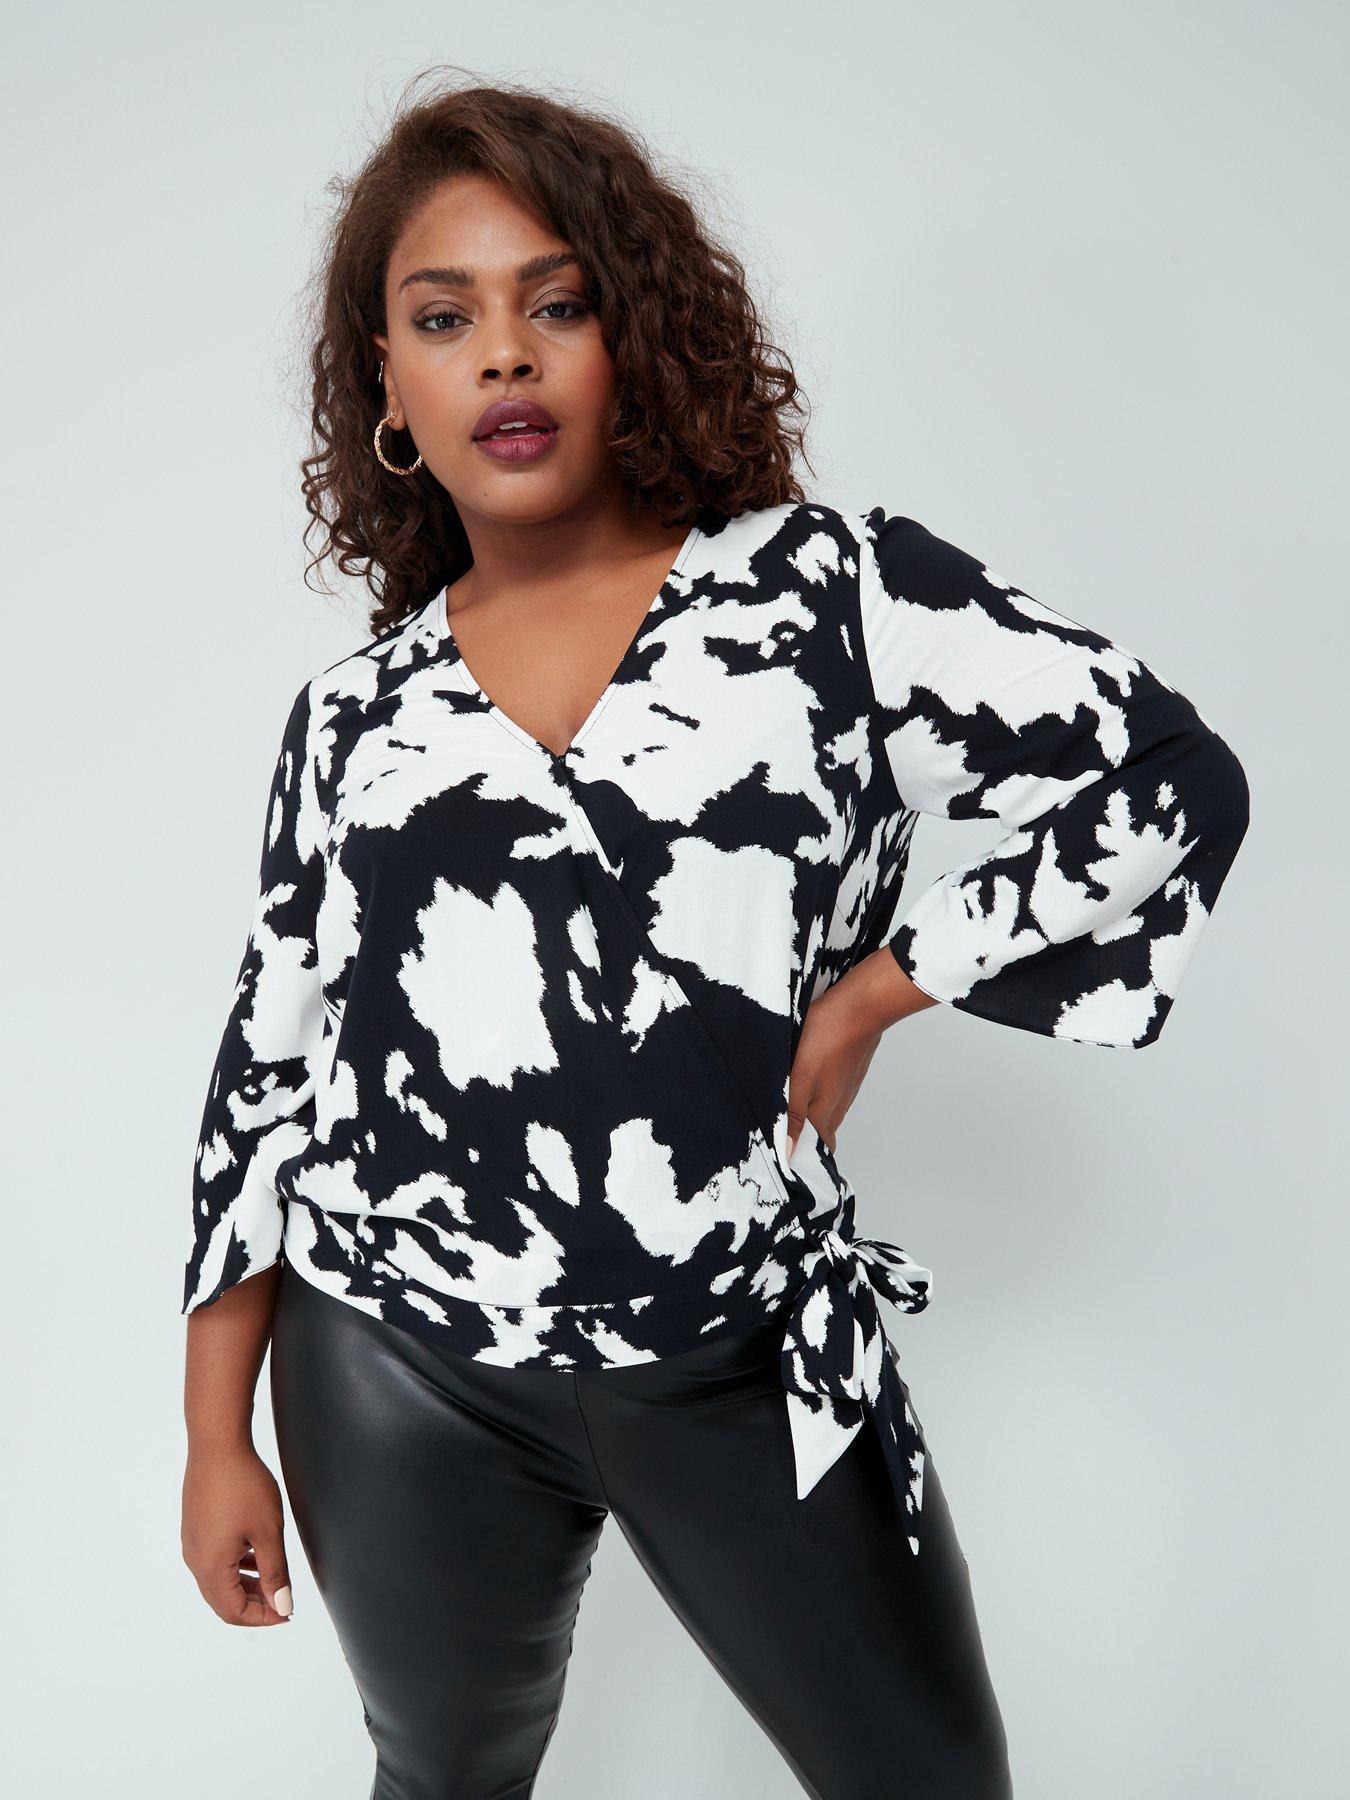 Womens Plus Size Tops 3/4 Sleeve Shirts for Women Summer Casual Print Tops Round Neck Loose Pullover Comfy Soft Blouses 